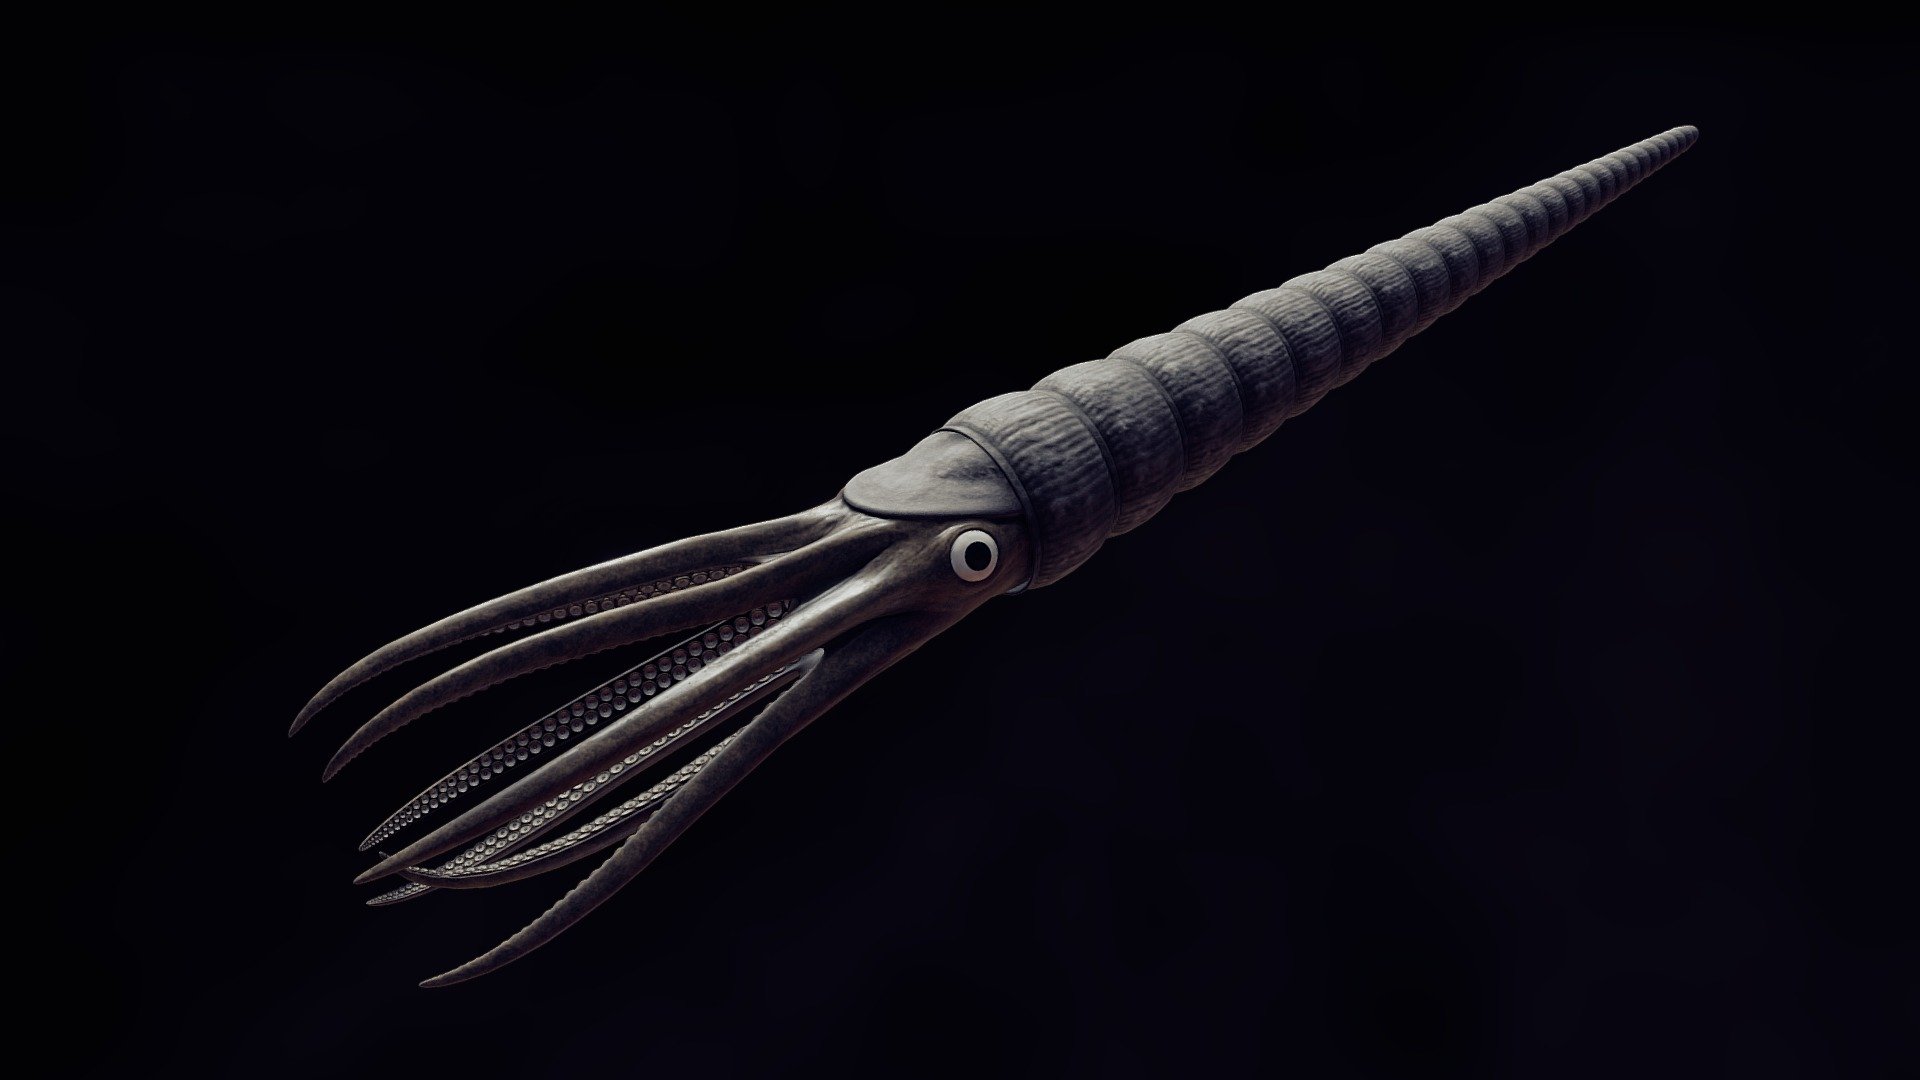 Everyone's second favourite ordovician cephalopod.

Skeletal Mid-poly PBR. Includes High-poly files, animation.

Another version of this model:
https://sketchfab.com/3d-models/cameroceras-c5ac67a75f7c4c34870702f35b71750f

Collection of my historical models:
https://sketchfab.com/avatrass/collections/historical-item-models - Cameroceras [Animated] - Buy Royalty Free 3D model by avatrass 3d model